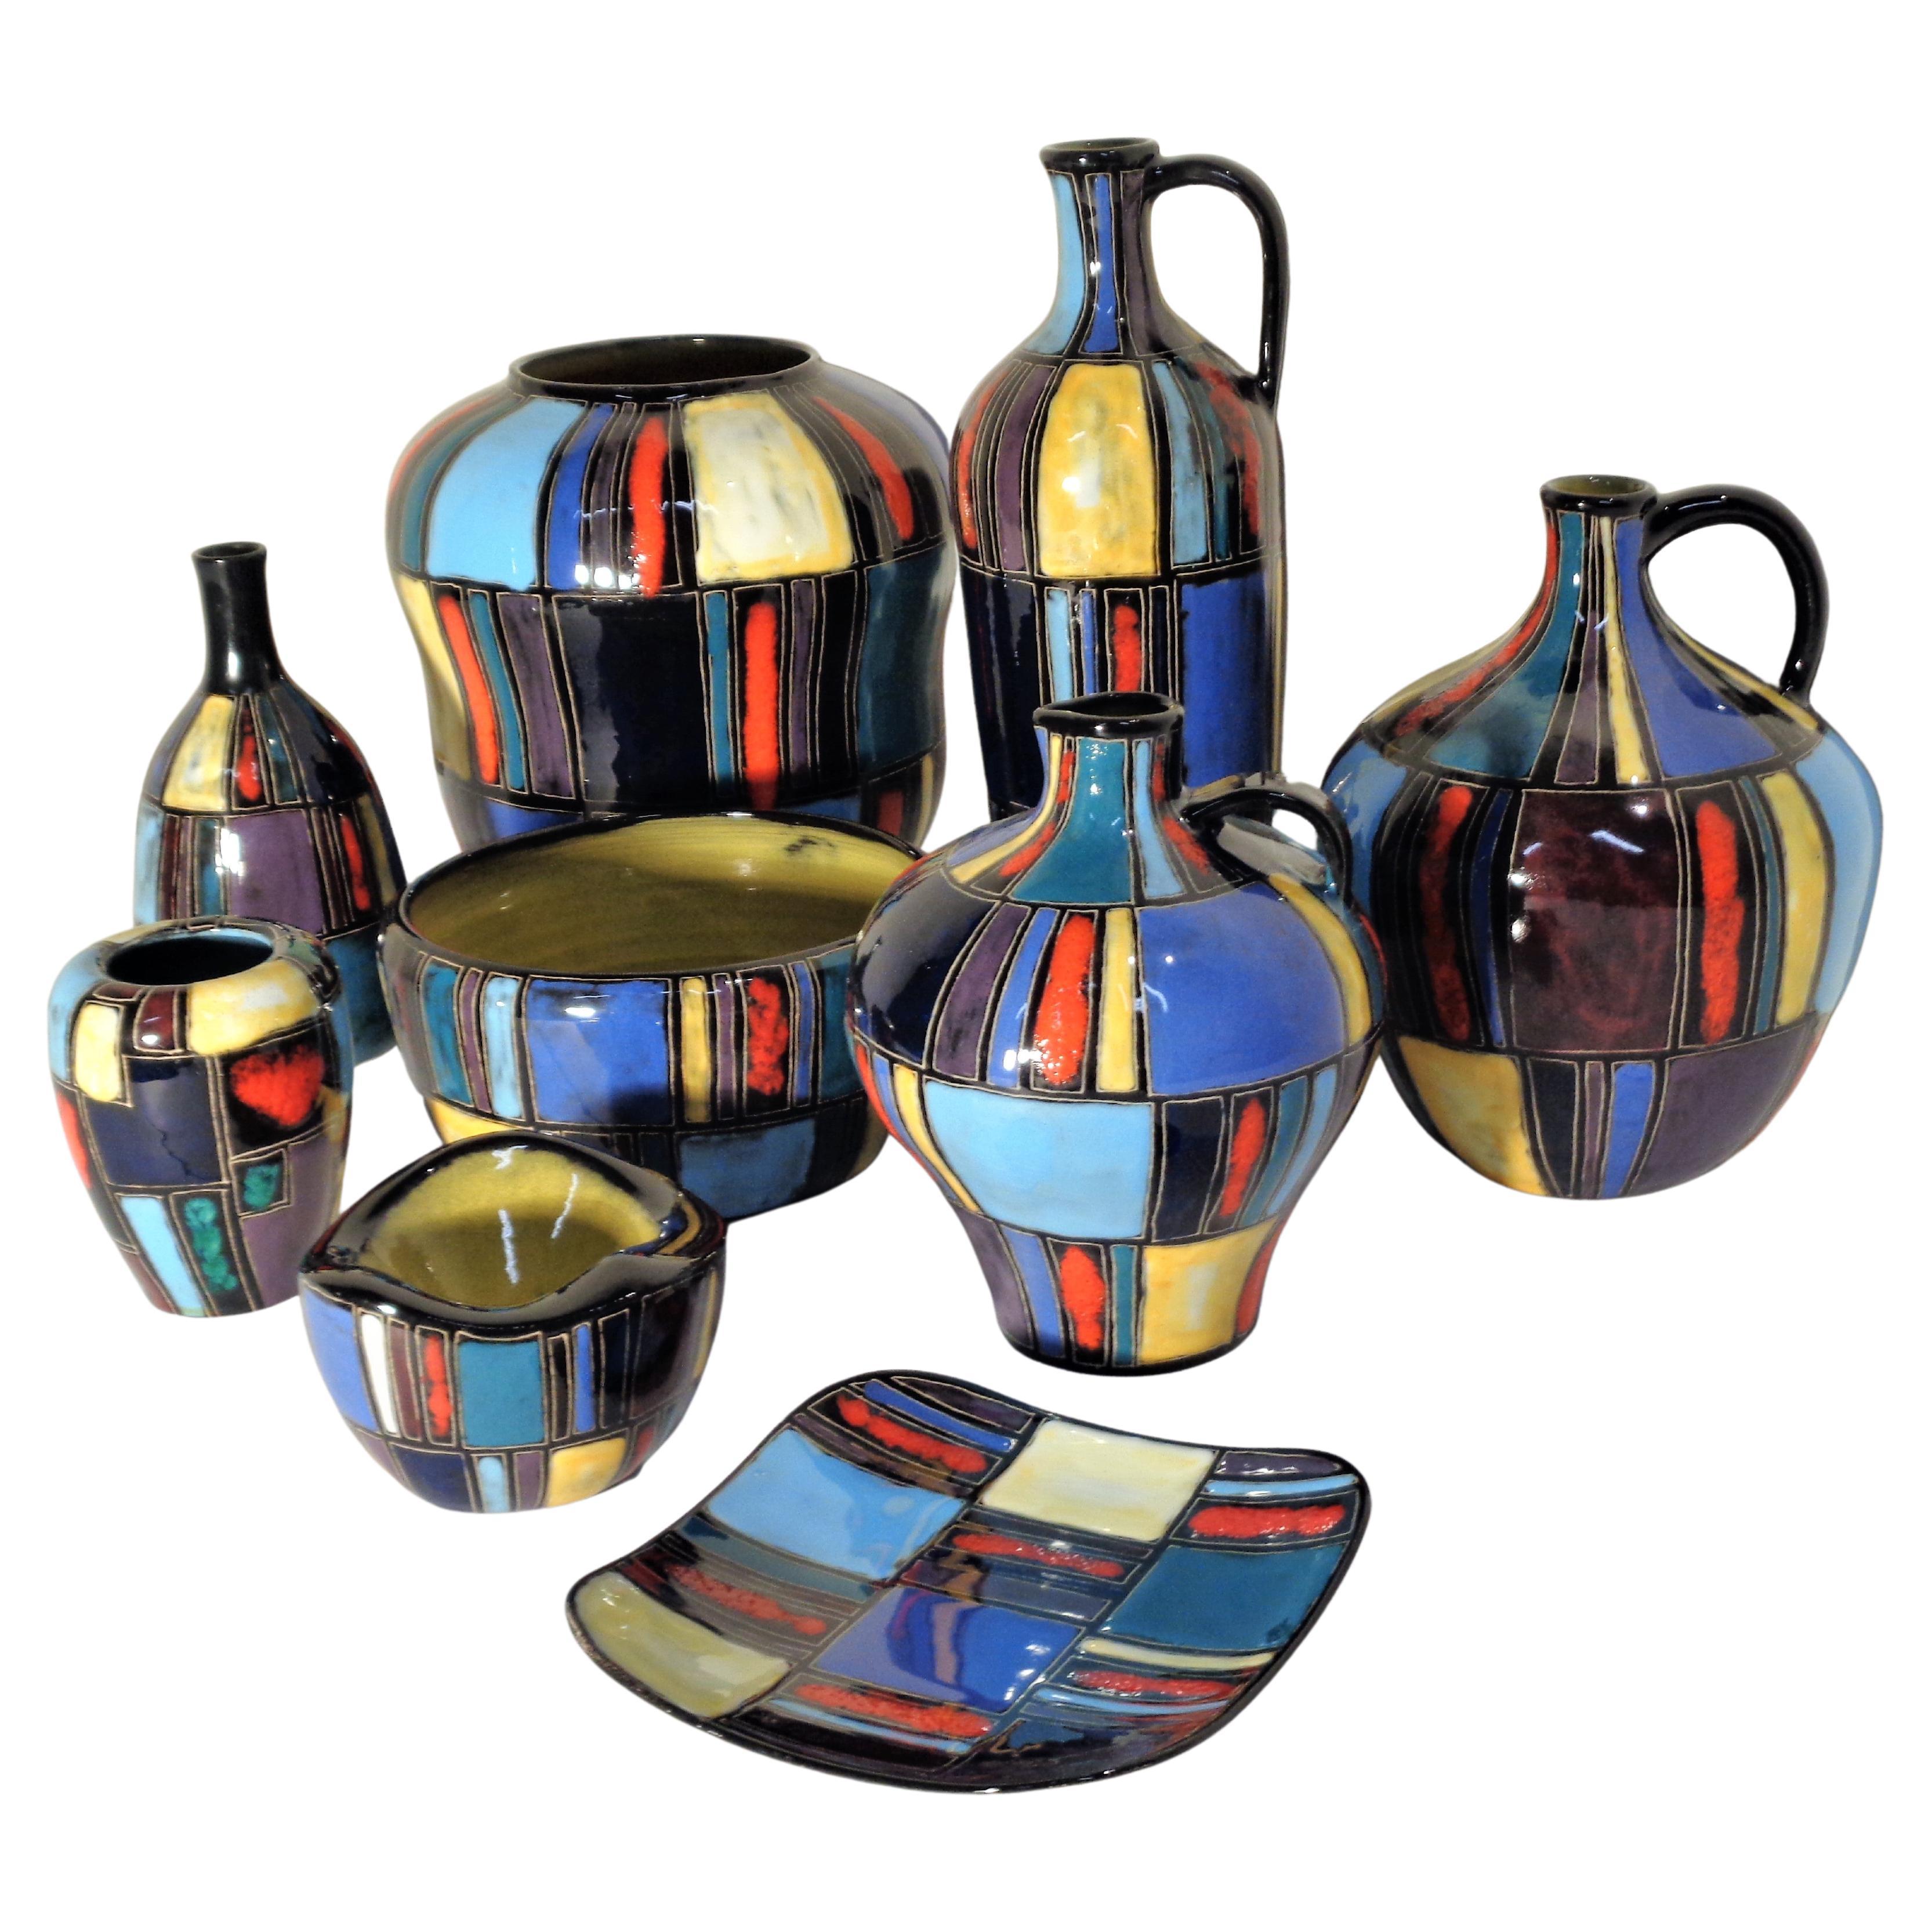 Hand-Painted Collection of Lu Klopfer Brilliant Art Pottery, Germany 1950's